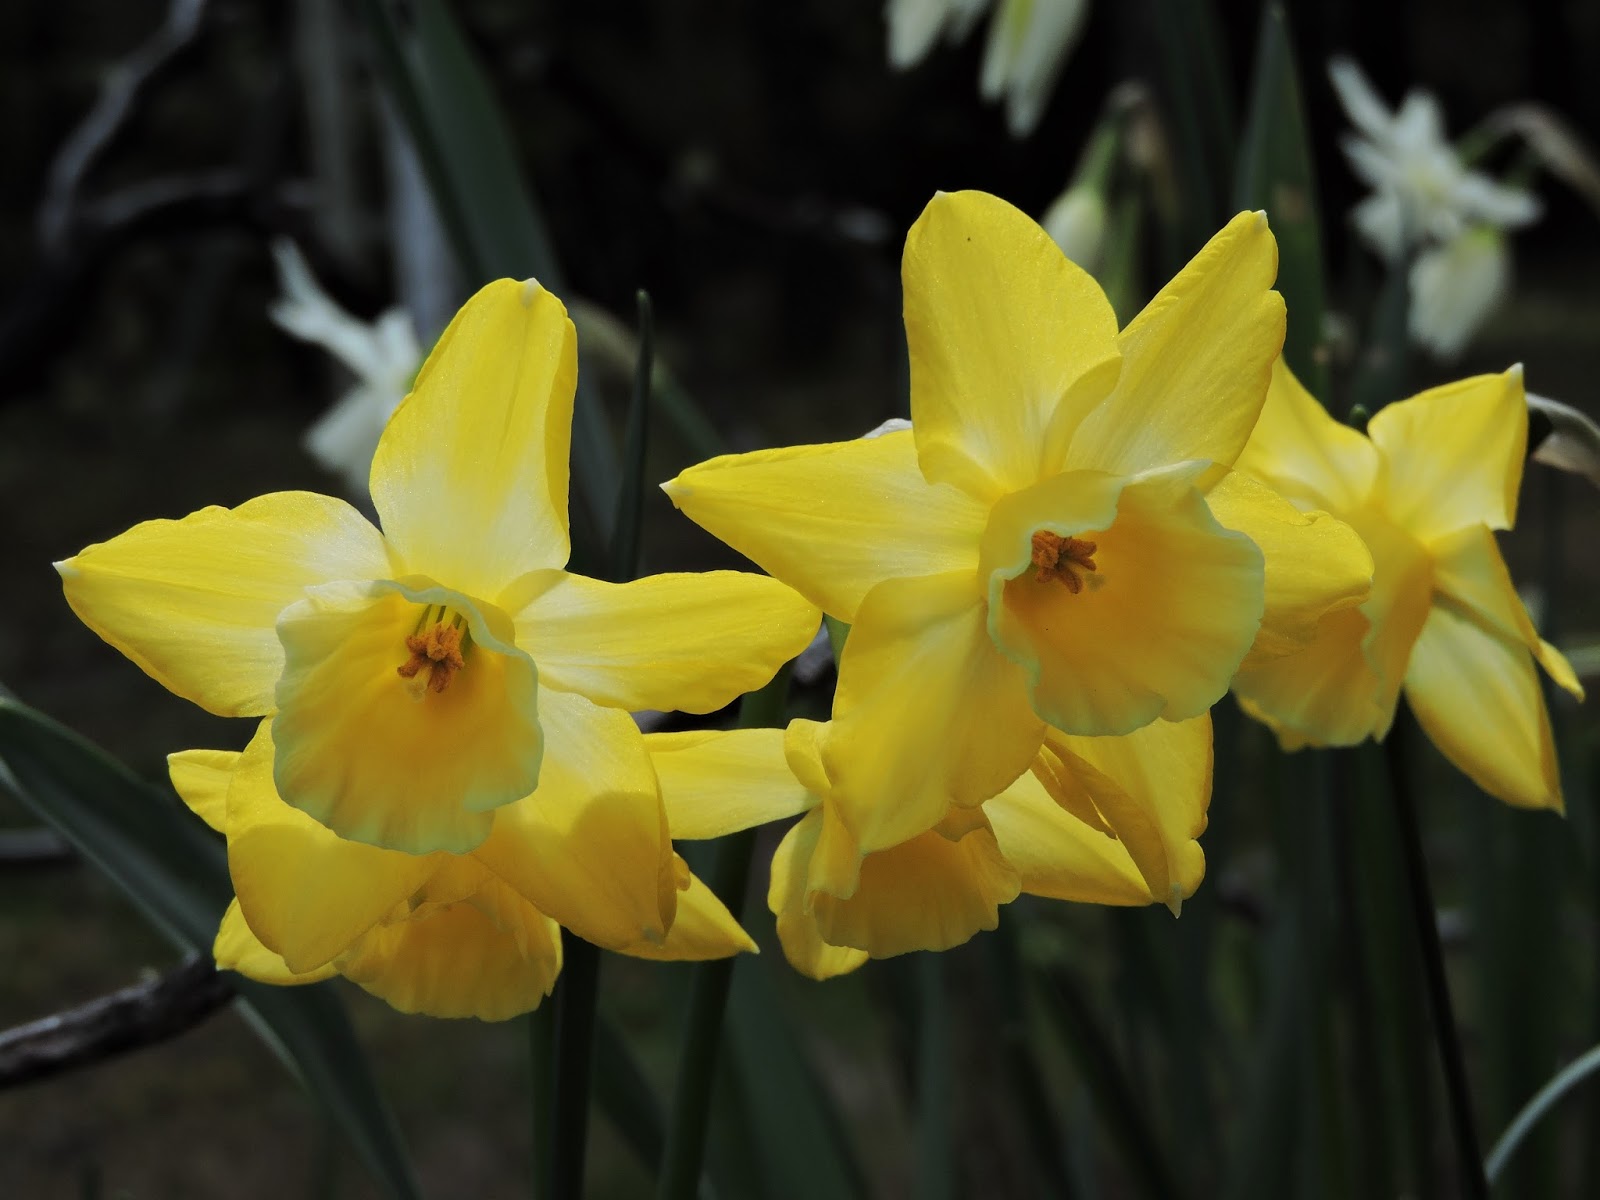 The Amateur Anthecologist: Flowers in April